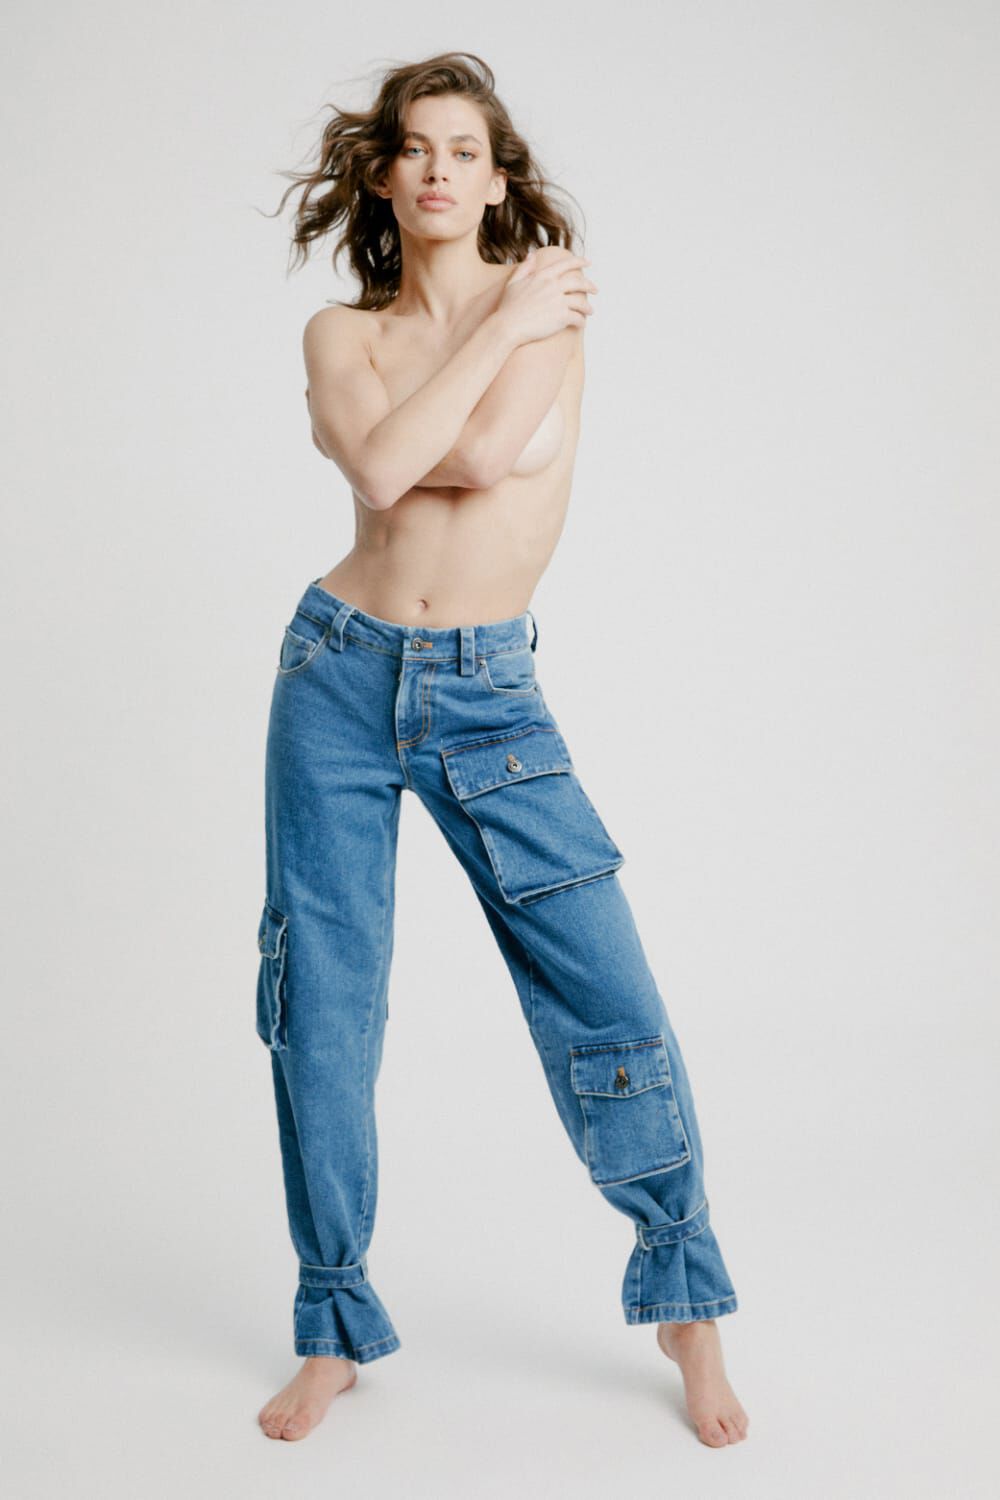 Cargo Jeans Are a Versatile Take on the Utilitarian Trend | Vogue